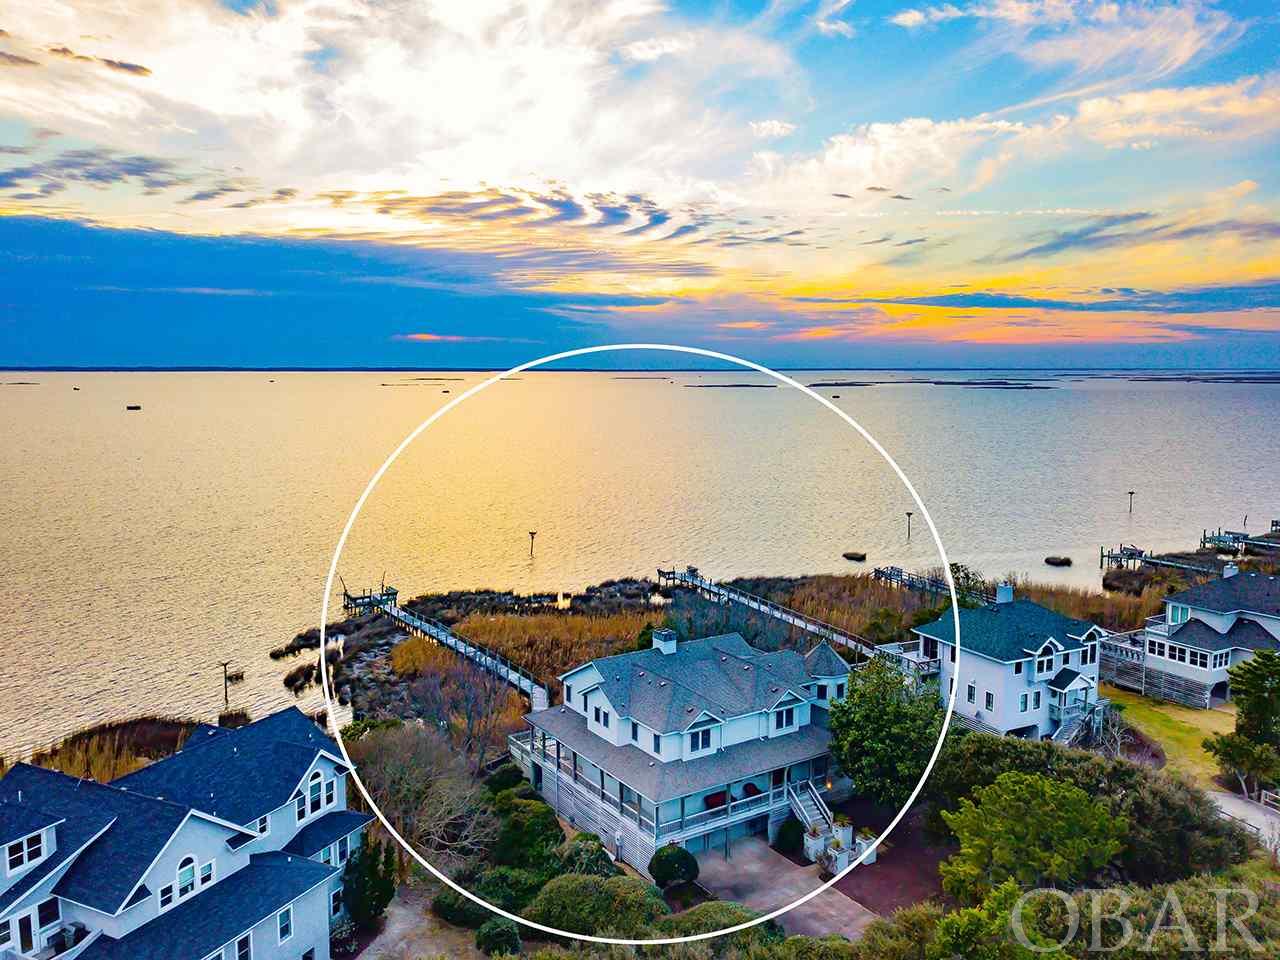 Waterfront Living at its Finest!  Never been rented and still occupied by the Original Owners, this Ken Green Custom Built Soundfront home in the Sanderling has endless bells and whistles.  The minute you walk in in the front door, your eye is immediately drawn to the custom stair handrail and custom trim work details...stunning!  The main level boasts a Sound View Master Suite, Living Room, Dining Room, Eat-In Kitchen, Walk-in Pantry, Powder room, and Laundry Room.  The Living Room features details including a Custom Mantle, Brass Sconces and Marble Surround Gas Fireplace, Built-in Cabinetry, Baseboards, Crown Molding, and French Doors to the Sound Front Covered and Sun Decking. The Dining Room is also impressive with more Custom Crown Molding, Baseboards, Wainscoting, Brass Chandelier and ceiling Medallion, Sun block shades, Sliders to the Sound Front Decking and even a Glass Pocket door to the Living Room (Kitchen also has Pocket door to Living Room, so you can essentially close off Dining and Kitchen from Living Room if desired).  The Chef’s Kitchen was REMODLED in 2012 and brings even more wow factor with a Walk-in Pantry, Custom Crystal Cabinetry, Stained Glass Windows, Corian Countertops, a Carrera Marble top Island, Wet Bar, Tongue in groove Cypress Ceiling, and Stainless appliances including a Gas Wolf Range and Wolf Electric Under Counter Oven, Sub Zero ALL Refrigerator (2nd Sub Zero in Laundry Room is ALL Freezer) and Ice Maker, and Kitchen Aid Dishwasher and Trash Compactor.  Be sure to ask your agent for a complete home features list found in Associated Docs!  The main level Master Suite also features sliders leading to the Soundfront decking, Cypress Wainscoting and Crown Molding, 2 Custom Walk-in Closets, Double Vanities, Stand Up Tiled Shower with double shower heads, Kohler Fixtures and Whirpool Tub, Custom Stained Glass Windows, and classic black and white tile flooring.  Many of these stunning bathroom features are also found in the Powder Room on this level.   The 2nd Level is ideally designed with a spacious Family Room complete with Vaulted Ceilings, French Doors to another Soundfront Deck, Sun Shades, another Wet Bar, an Under counter Sub Zero fridge/freezer, Sound System, and glass pocket doors to close off the room from the hallway, if desired.  There are 3 additional Master Bedrooms on the 2nd level, each with its own private full Bathroom, a ‘hideout’ custom painted bunk room,  as well as a ‘hidden’ private Office.  There is no lack of storage in this home as you will find cedar lined closets throughout including the Ground Level Mud Room.  The Ground Level also offers a spacious half Bathroom (accessed from outside) with a direct drain dehumidifier, 2 Large Outside Showers, a Fish Cleaning Table with Double Sink, 4 car enclosed Garage, Fridge/Freezer, and 2 additional storage closets (perfect for beach gear!).  ADDITIONAL HOME FEATURES include: 2 NEW HVAC Trane Units (inside Air Handlers and outside Heat Pumps) Jan. 2021; Oak Hardwood Flooring; Casablanca Ceilings Fans; Aluminum roll shutters on all windows and doors; 15,000kw Generac Generator; Hydraulic Elevator; Spa/Hot Tub; 6 Zone Irrigation System; Two Hot Water Heaters; Security/Fire Alarm system with 2 exterior cameras; Central Vacuum; Bulkhead; Private Walkway to Sound; Private Dock w/ Davits (no motors), Water and Electric; Lightning rods; Driveway lights; Gutters and Downspouts; Low E Andersen windows; 6” Exterior Walls; Structural steel beams along length of house; Manufactured roof trusses with hurricane straps; Manufactured floor joists for extra strength; Frost proof hose bibs (mid and upper level); Regular bibs and foot washes at ground level; Hurricane locks on Garage Doors; NEW ROOF about 10 years ago; Dog Enclosure.  Truly a rare find on the Outer Banks, NC!  MATTERPORT TOUR LINK: https://my.matterport.com/show/?m=wiNKNSGEJpX&brand=0